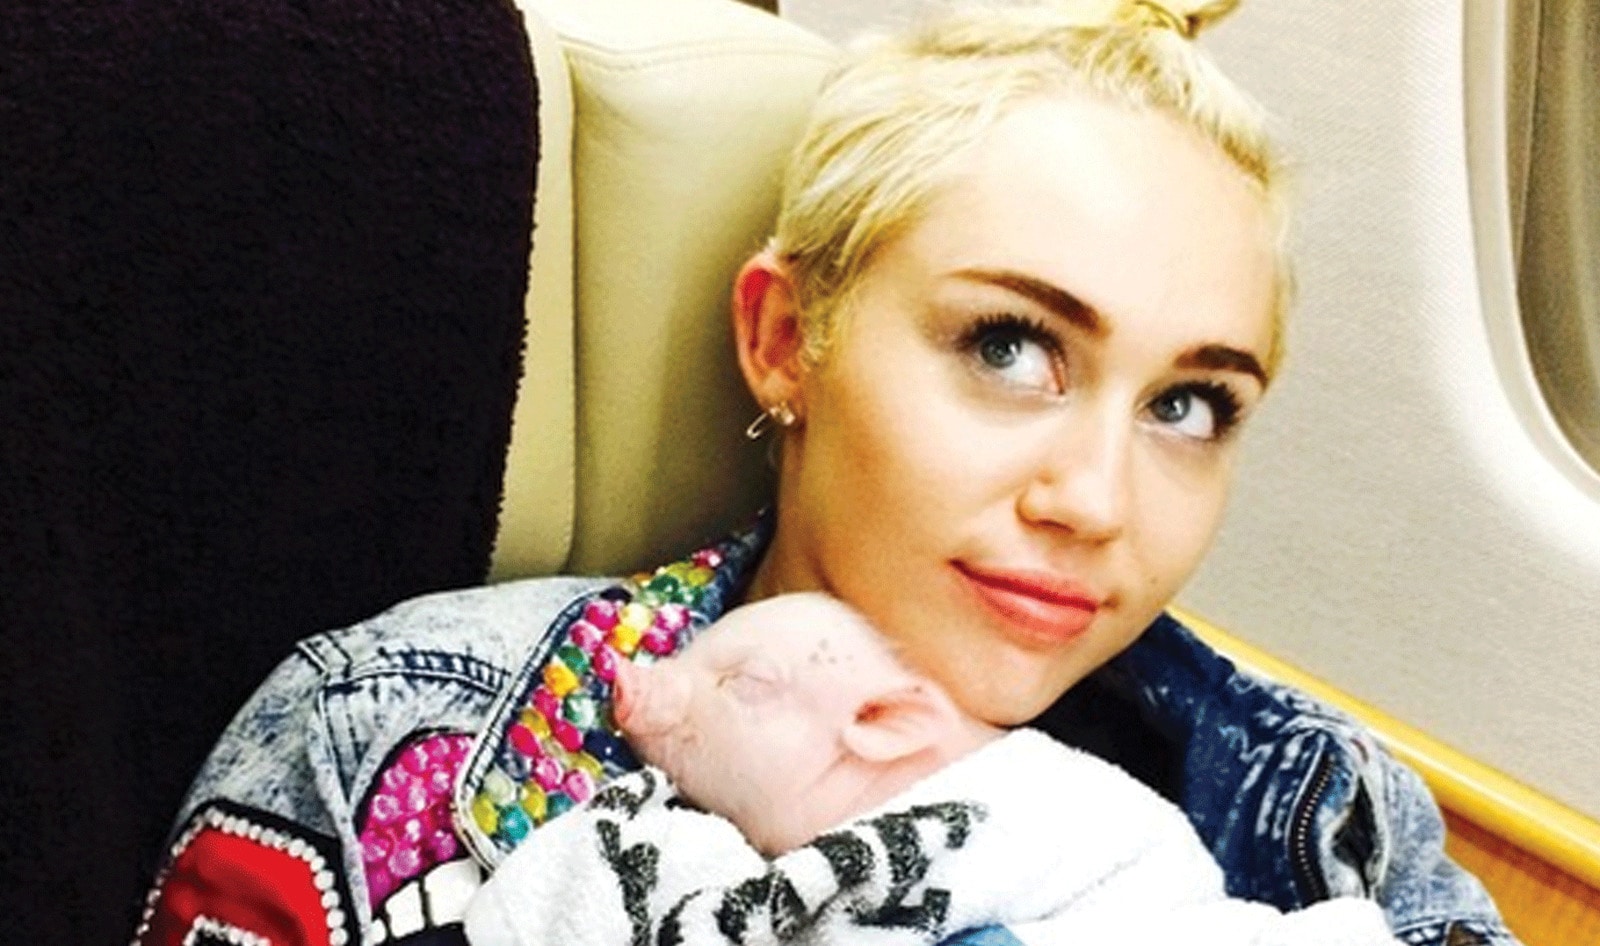 Miley Cyrus Mourns the Passing of Companion Pig